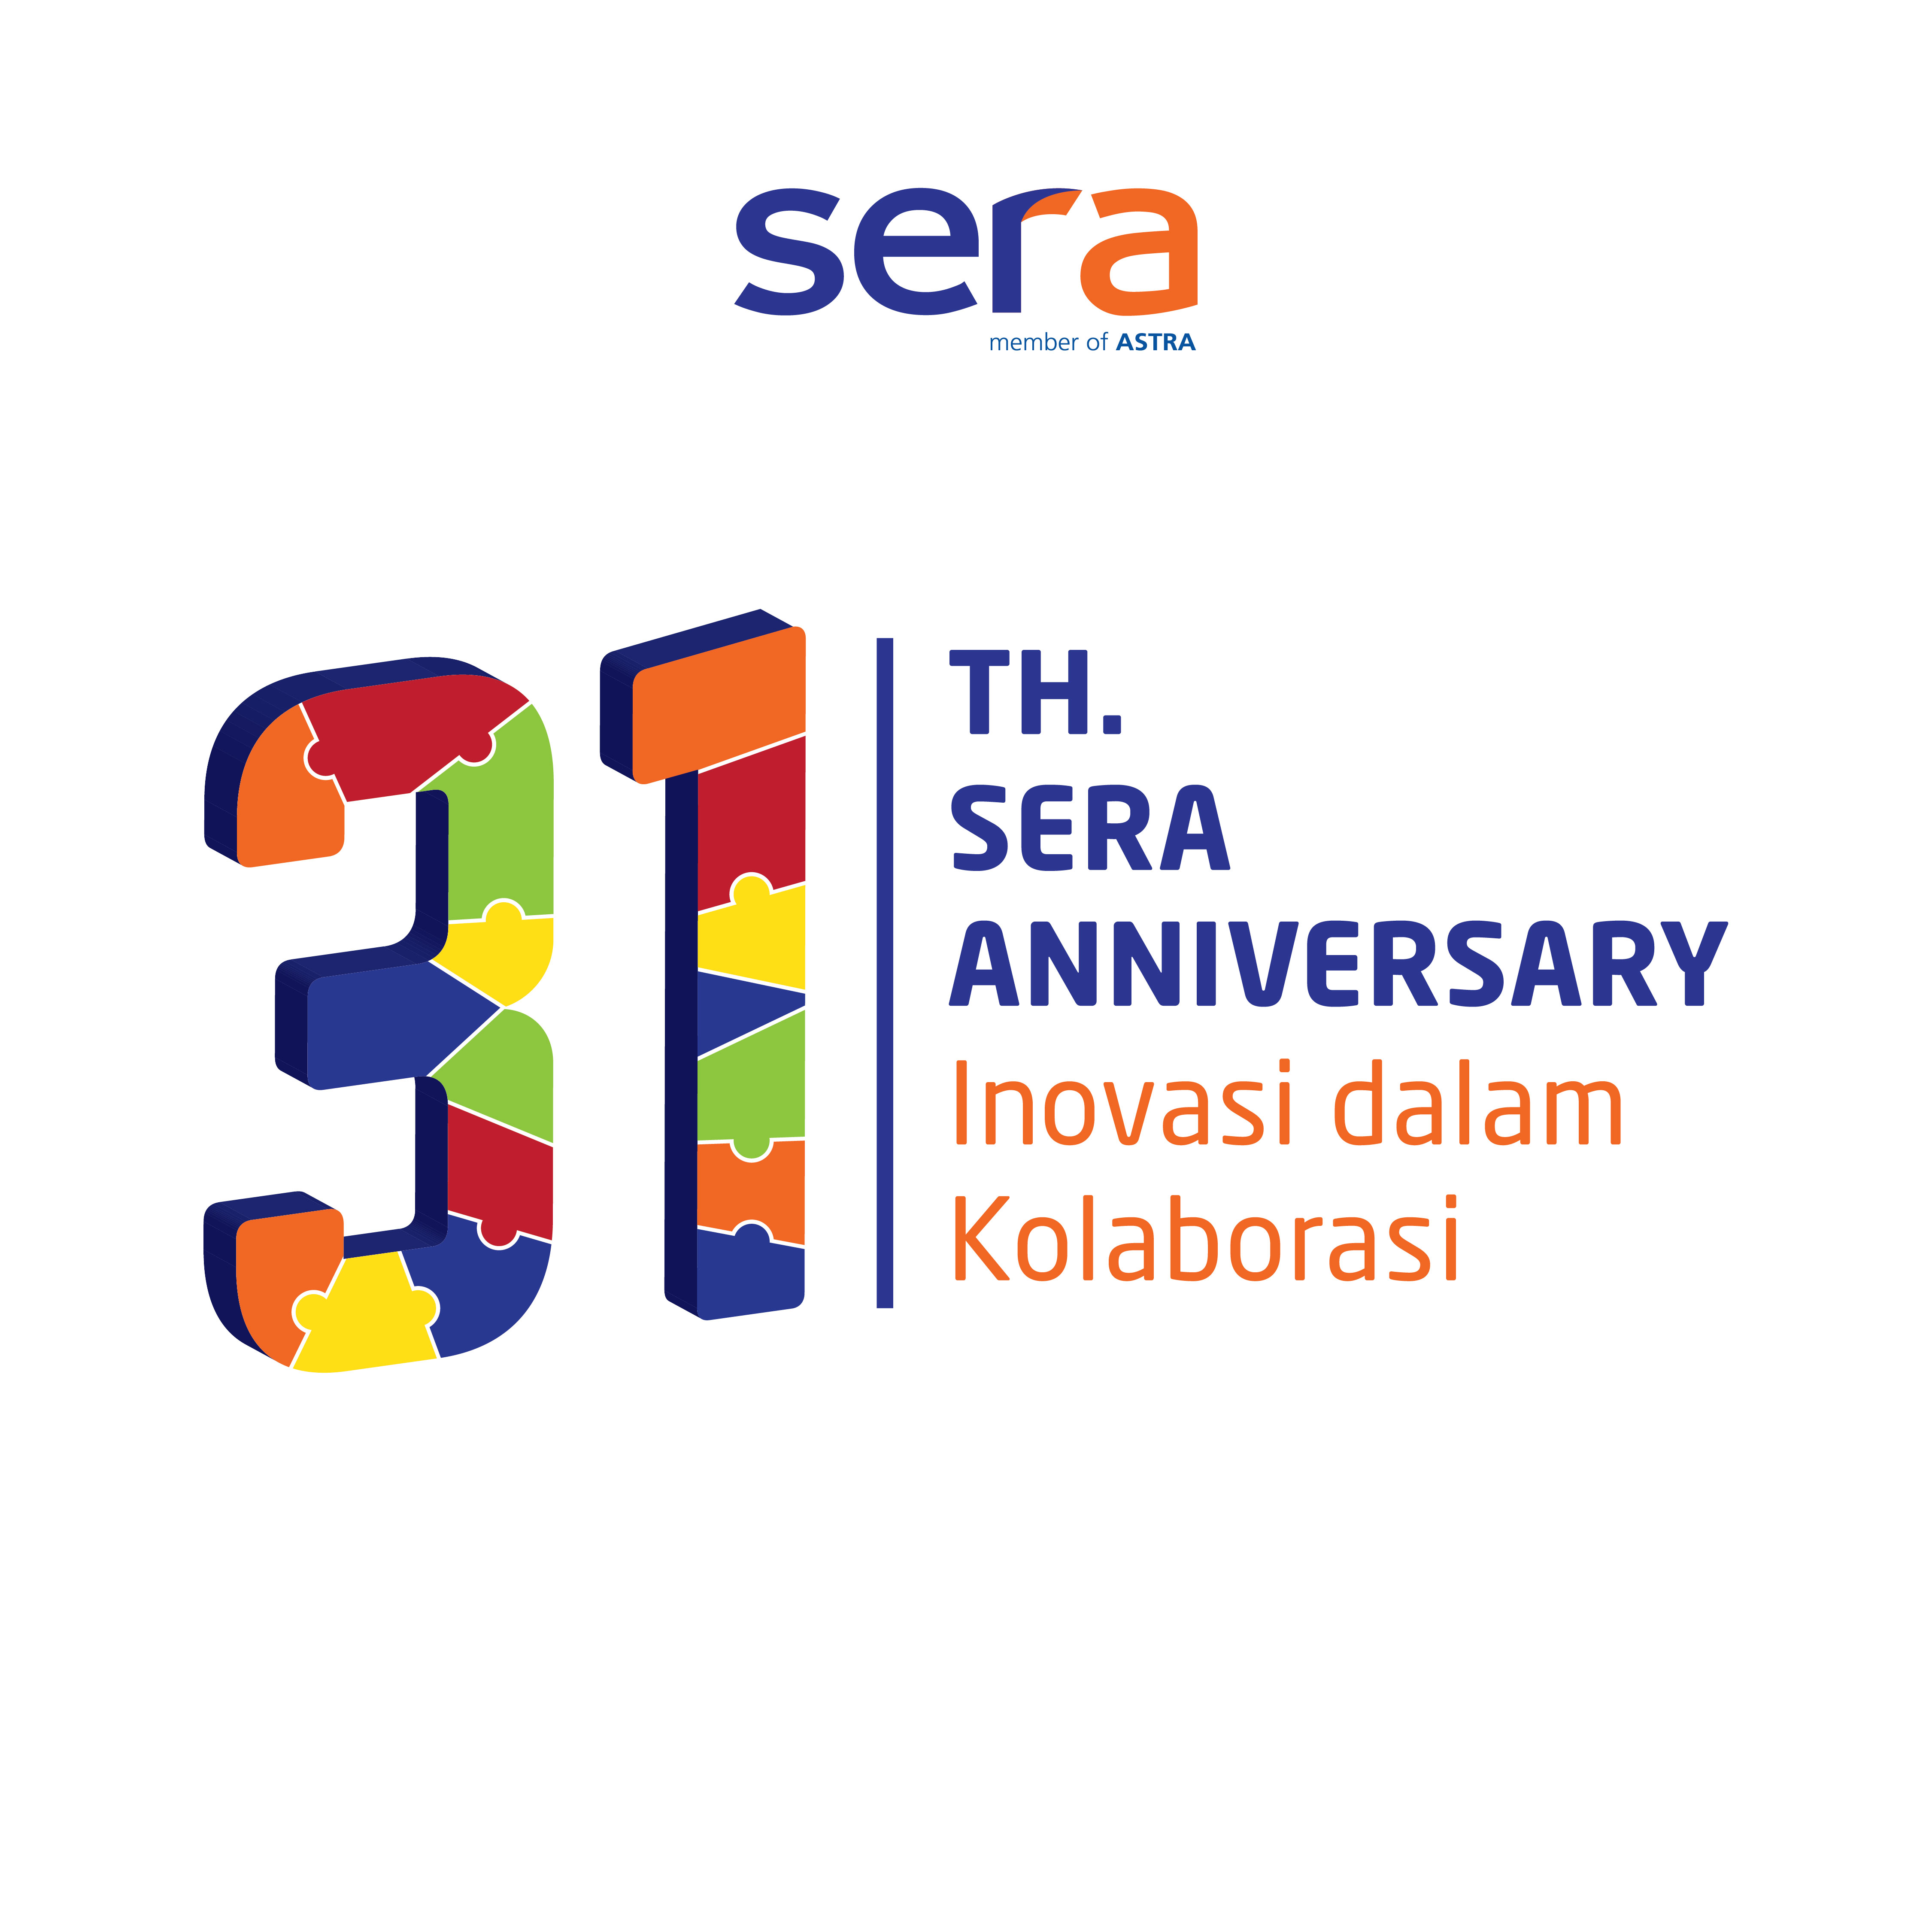 MORE MATURE, 31 YEARS OF SERA’S INNOVATION IN COLLABORATION